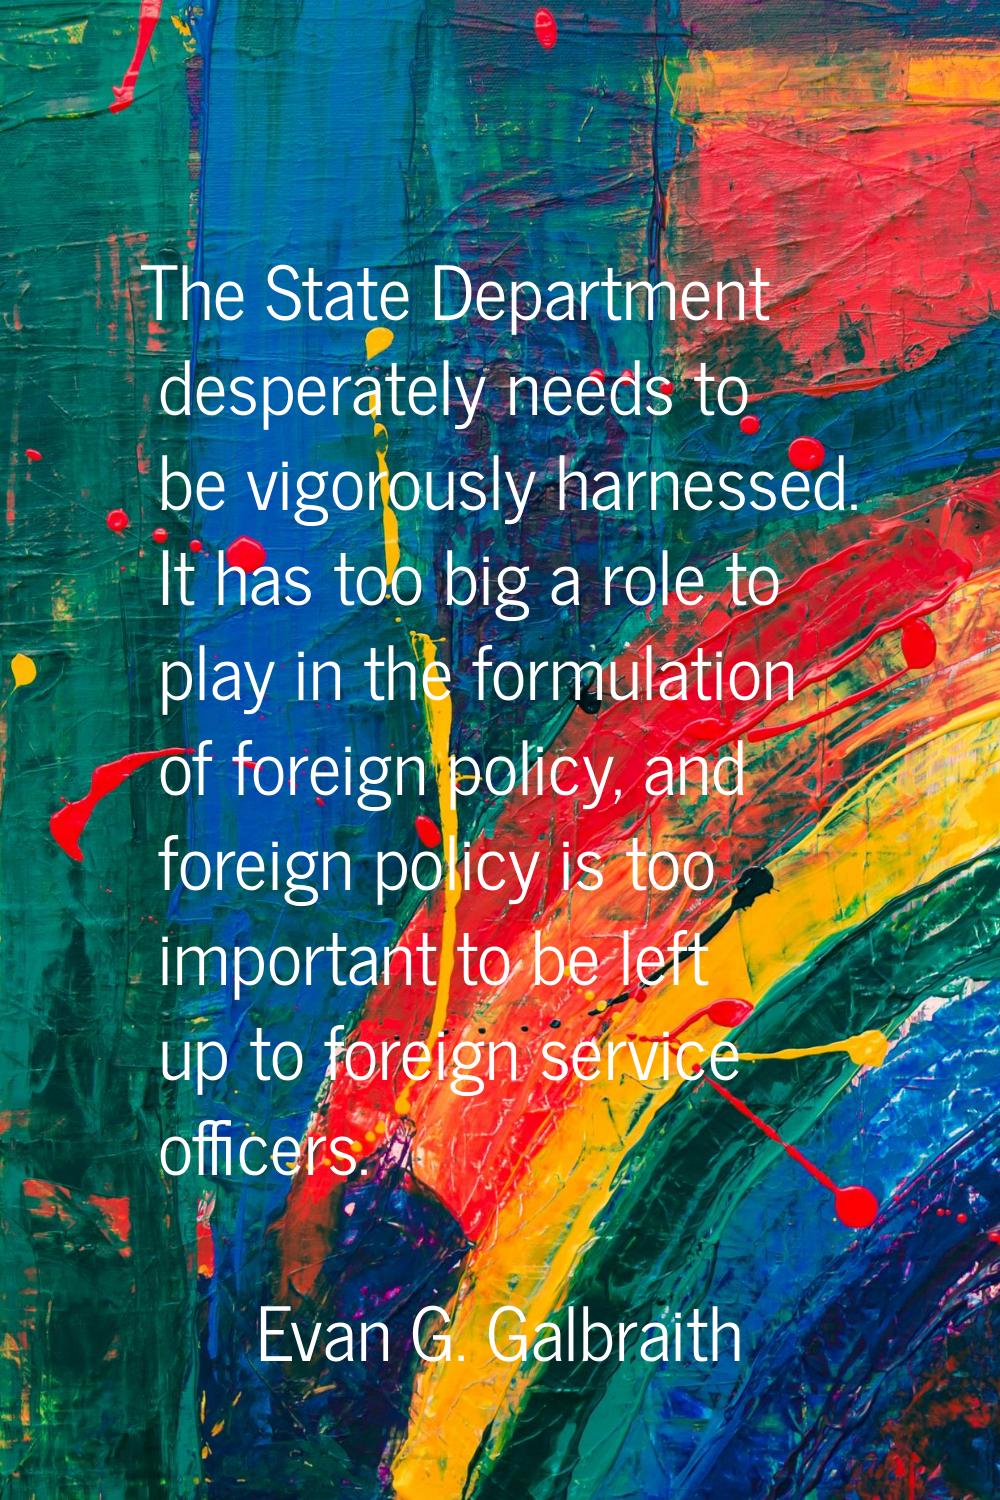 The State Department desperately needs to be vigorously harnessed. It has too big a role to play in